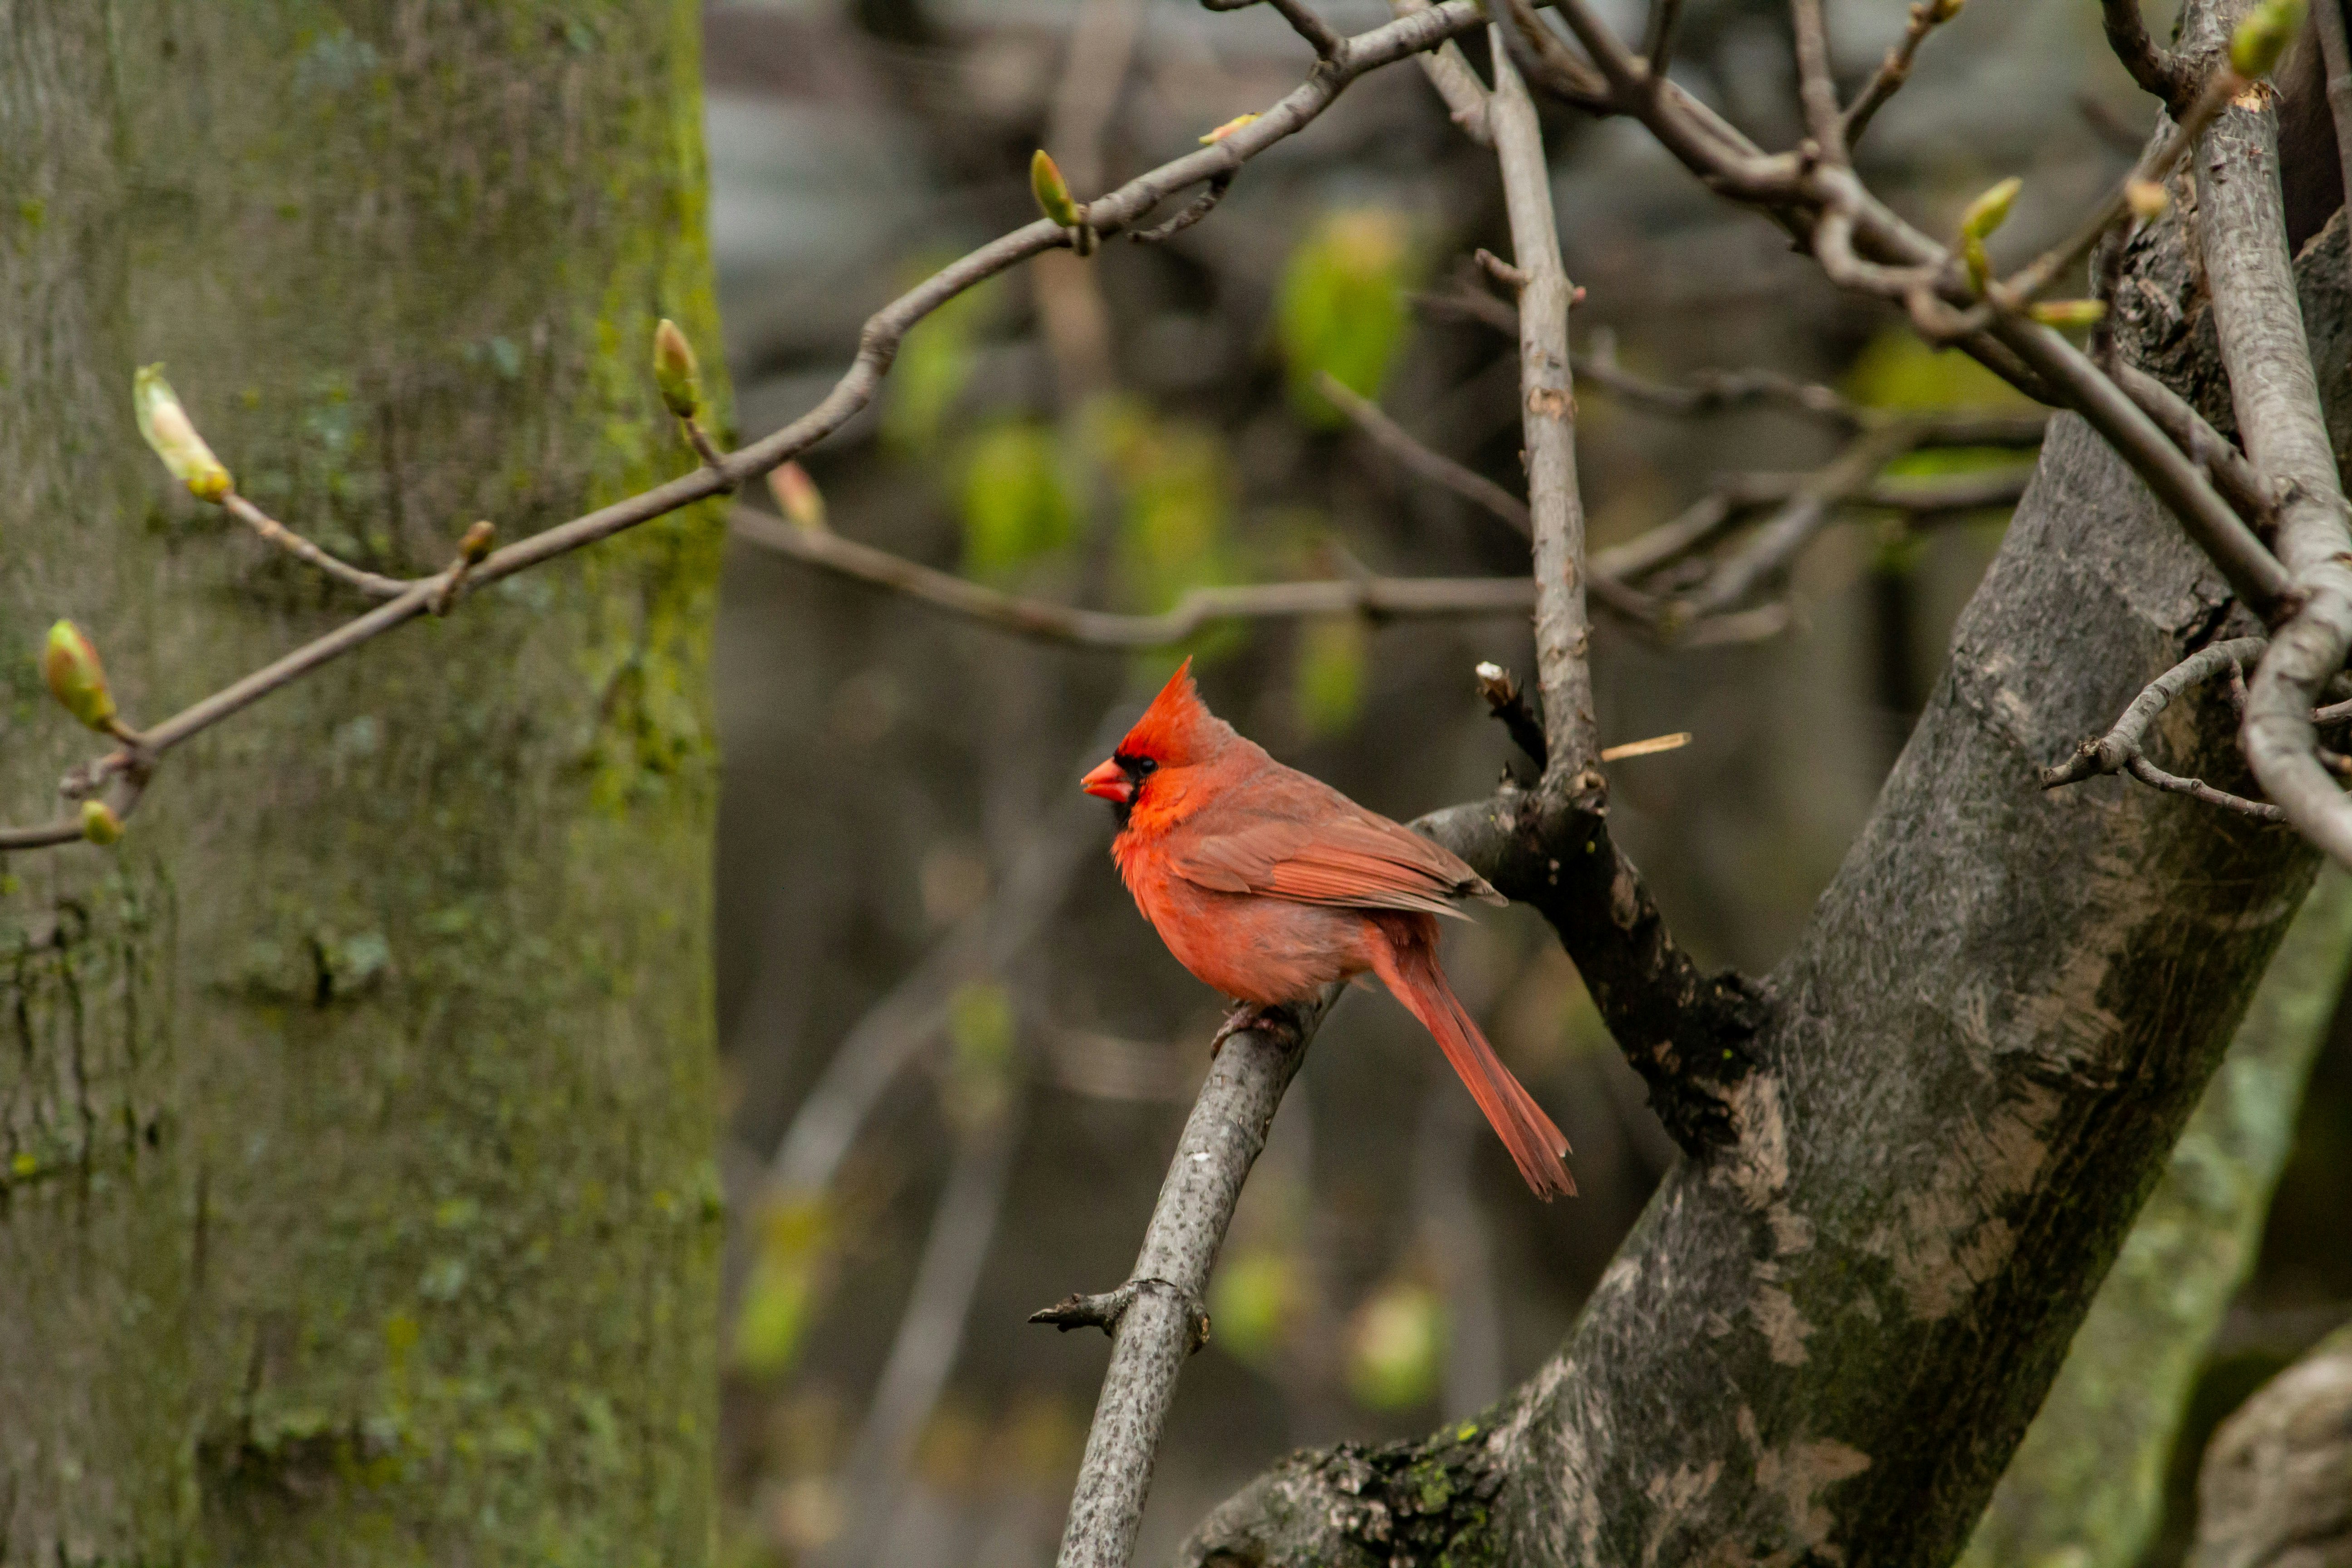 Northern Cardinal perching on tree brand during daytime